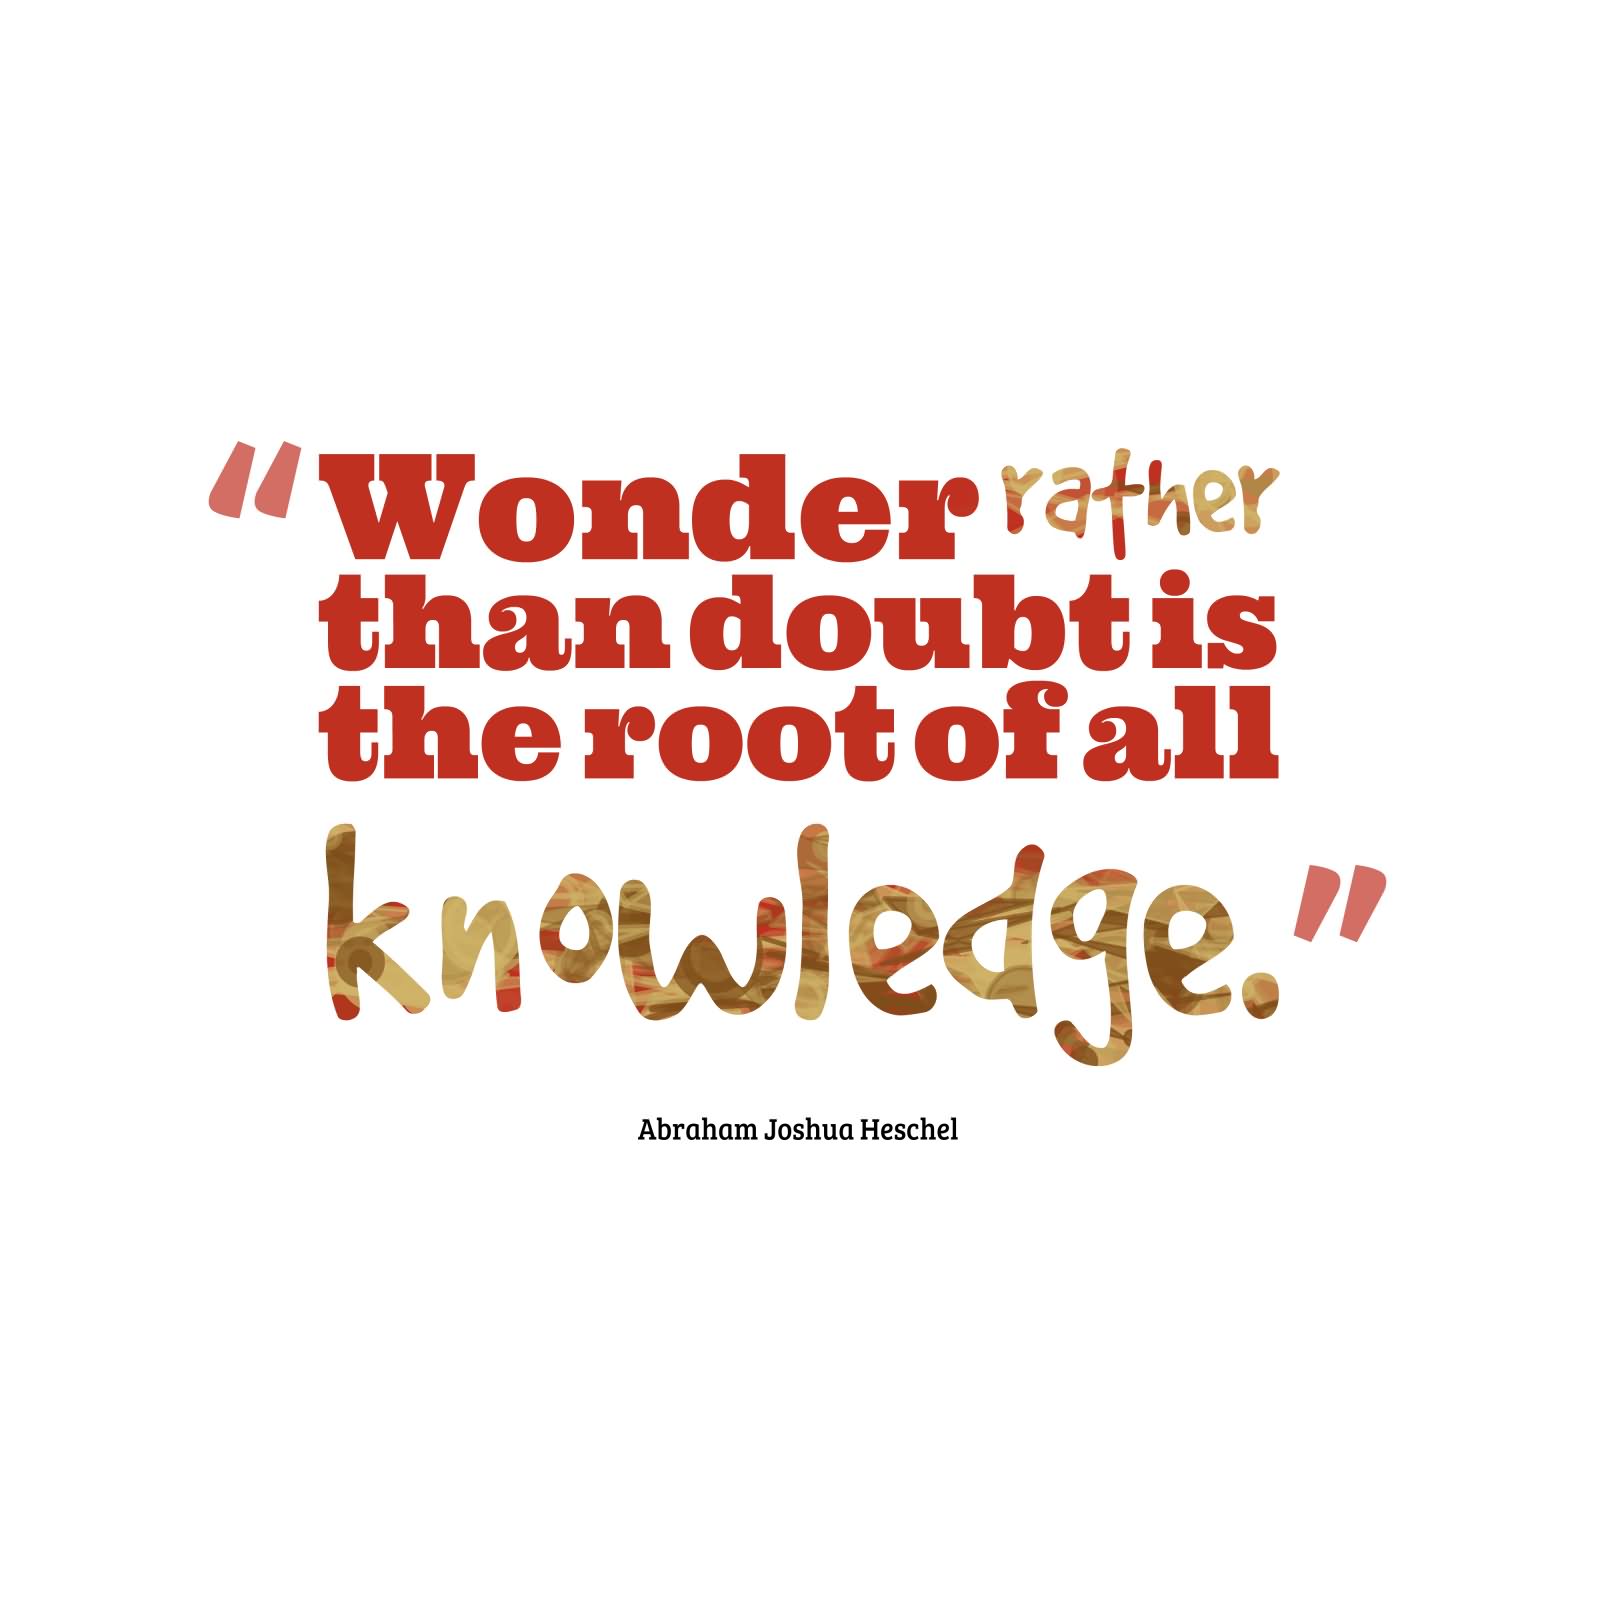 Wonder rather than doubt is the root of all Knowledge.